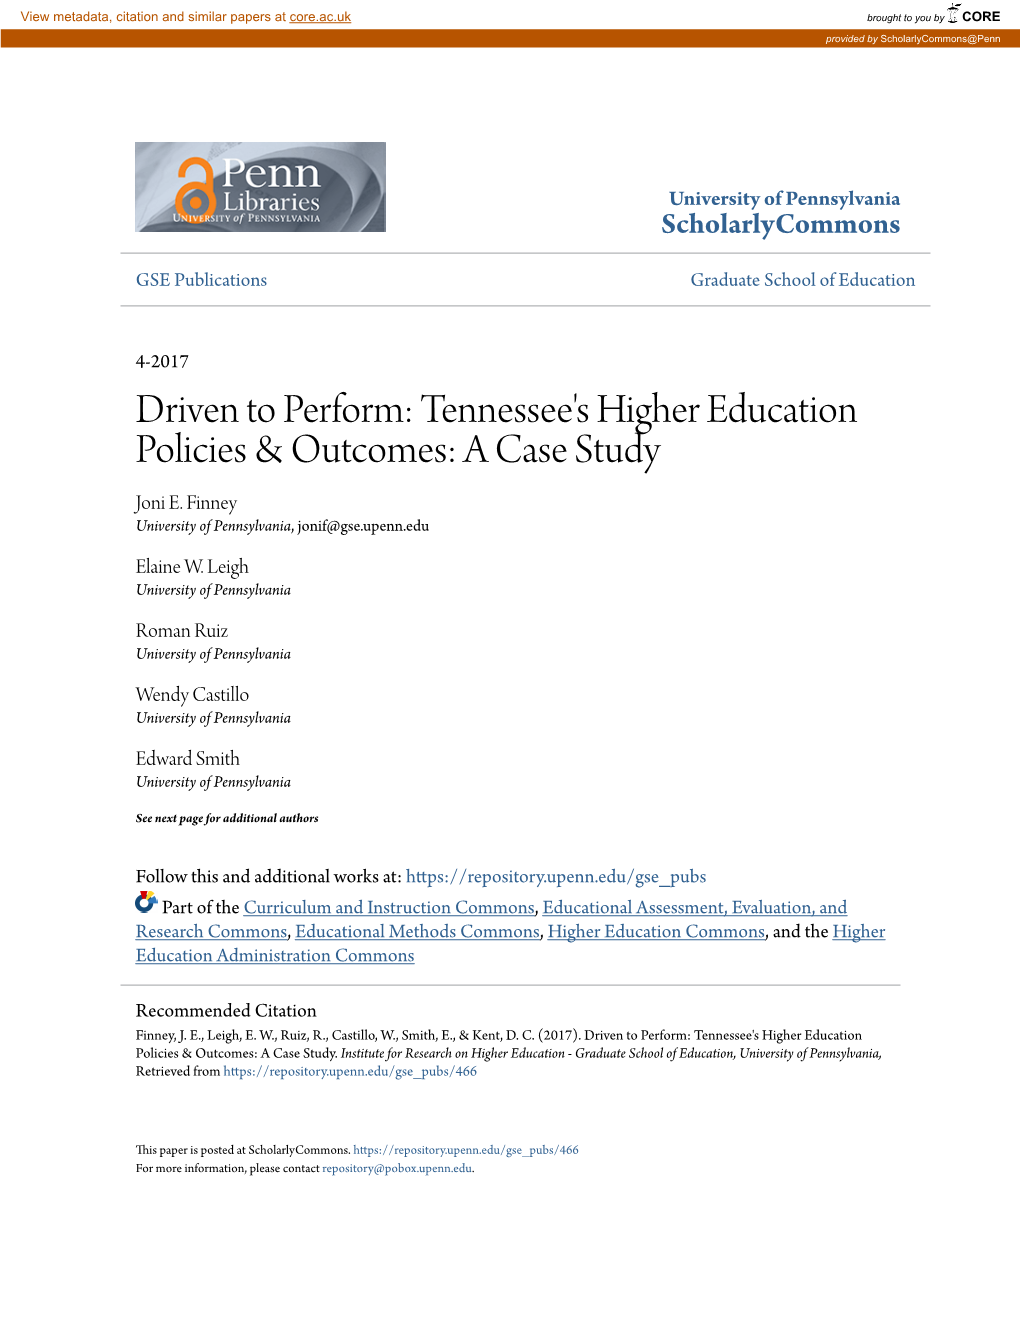 Tennessee's Higher Education Policies & Outcomes